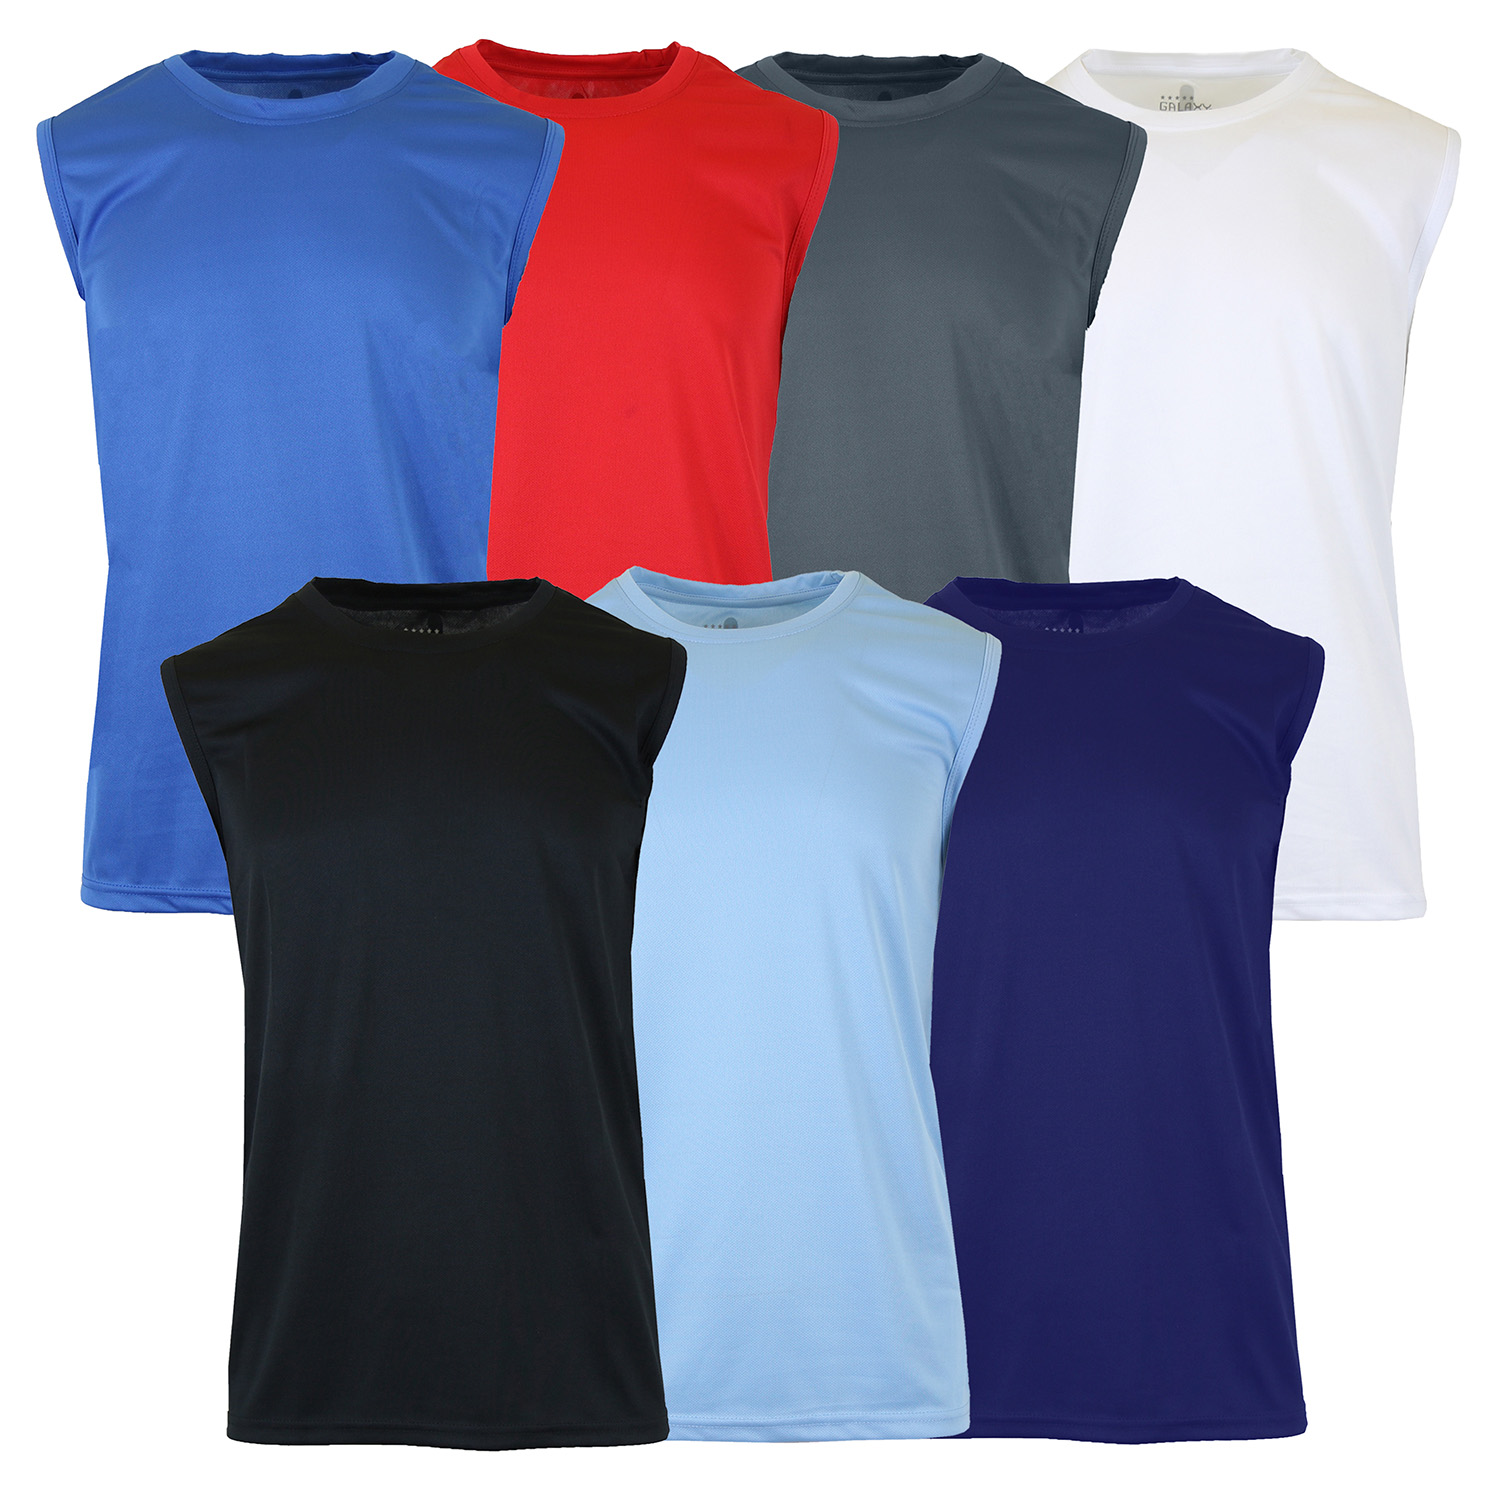 6 Pack Assorted Men's Moisture Wicking Wrinkle Free Performance Muscle Tee